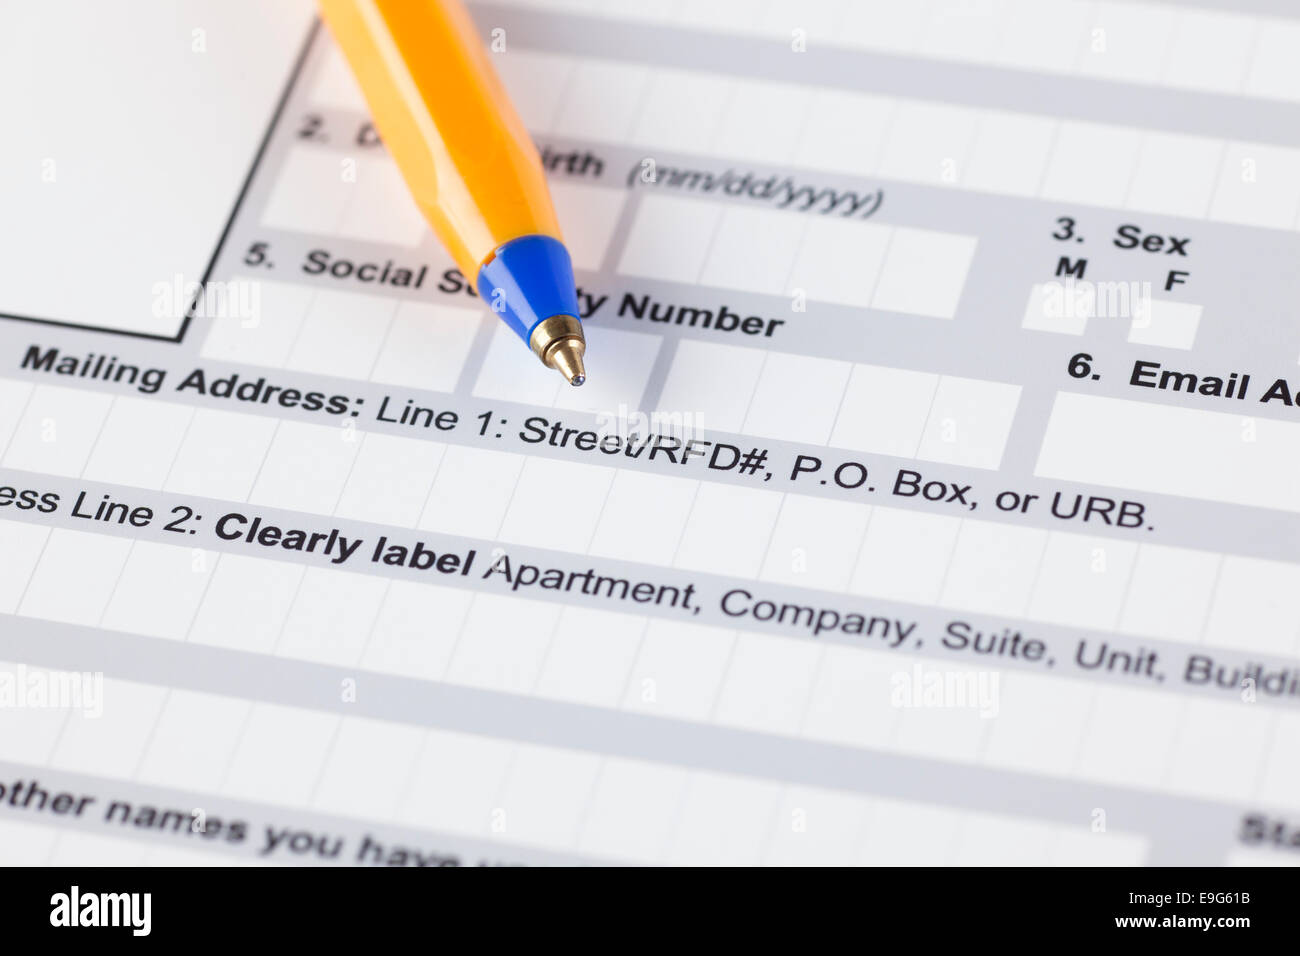 Application form with ballpoint pen. Focus on mailing address line. Stock Photo